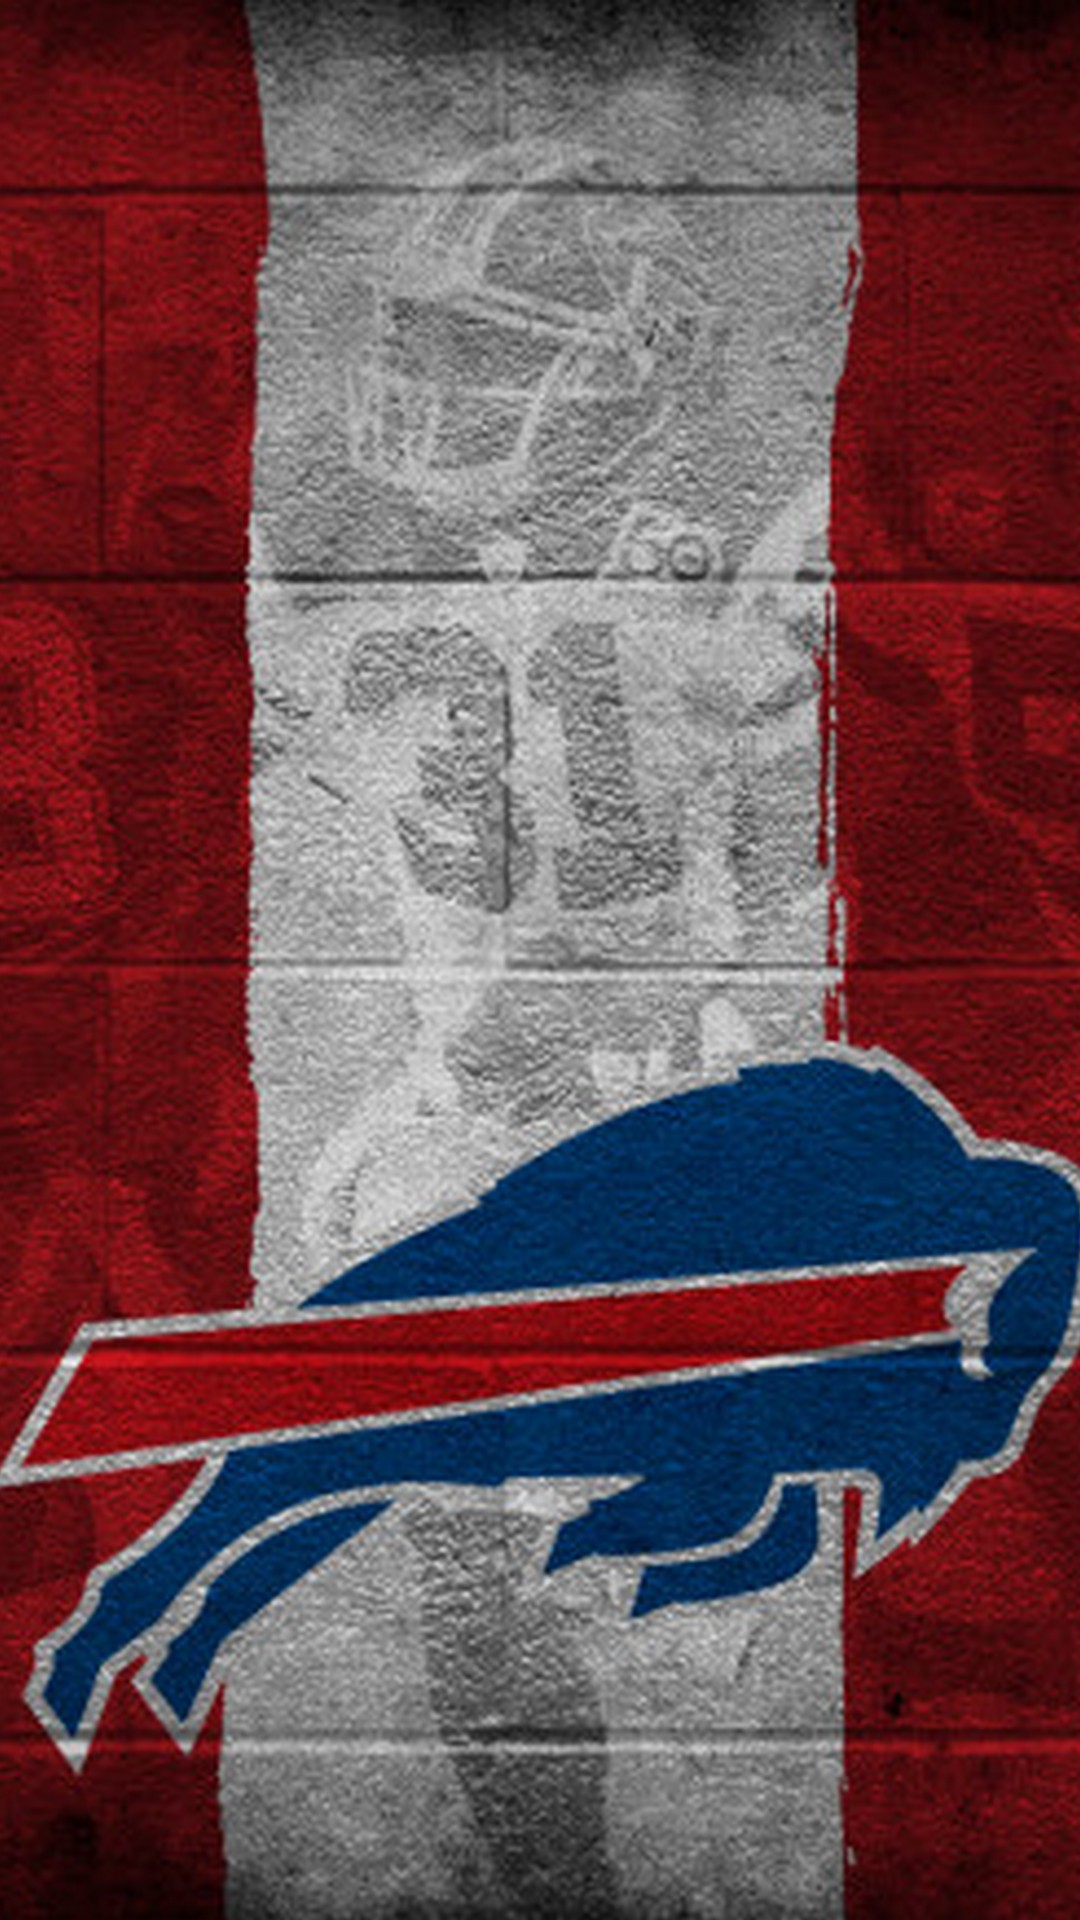 Buffalo Bills iPhone XS Wallpaper with high-resolution 1080x1920 pixel. Download and set as wallpaper for Apple iPhone X, XS Max, XR, 8, 7, 6, SE, iPad, Android